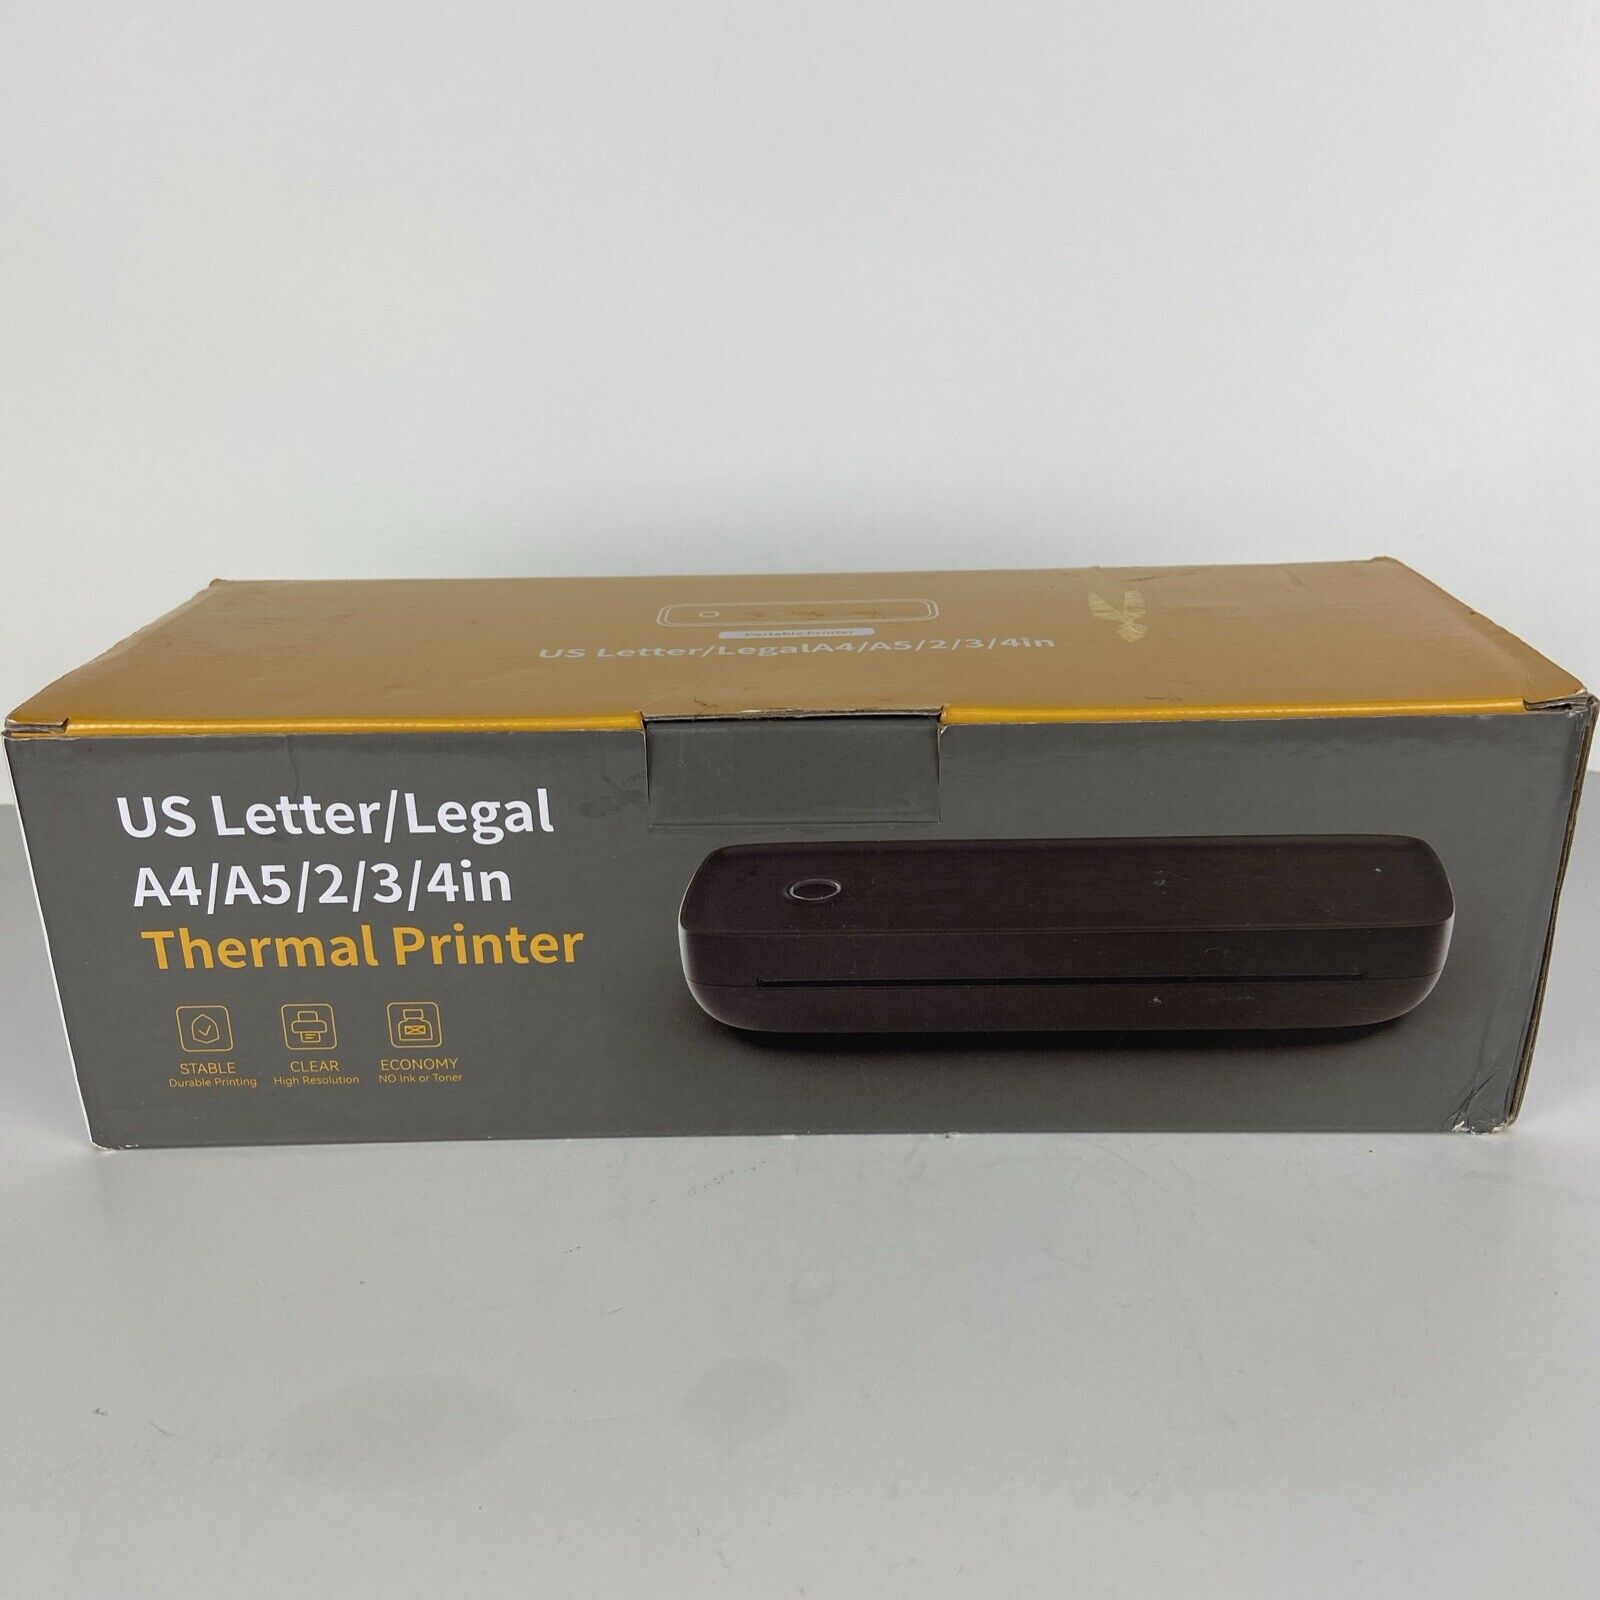 US Letter Legal A4 A5 2 3 4 in Thermal Printer Portable Bluetooth - Model A80